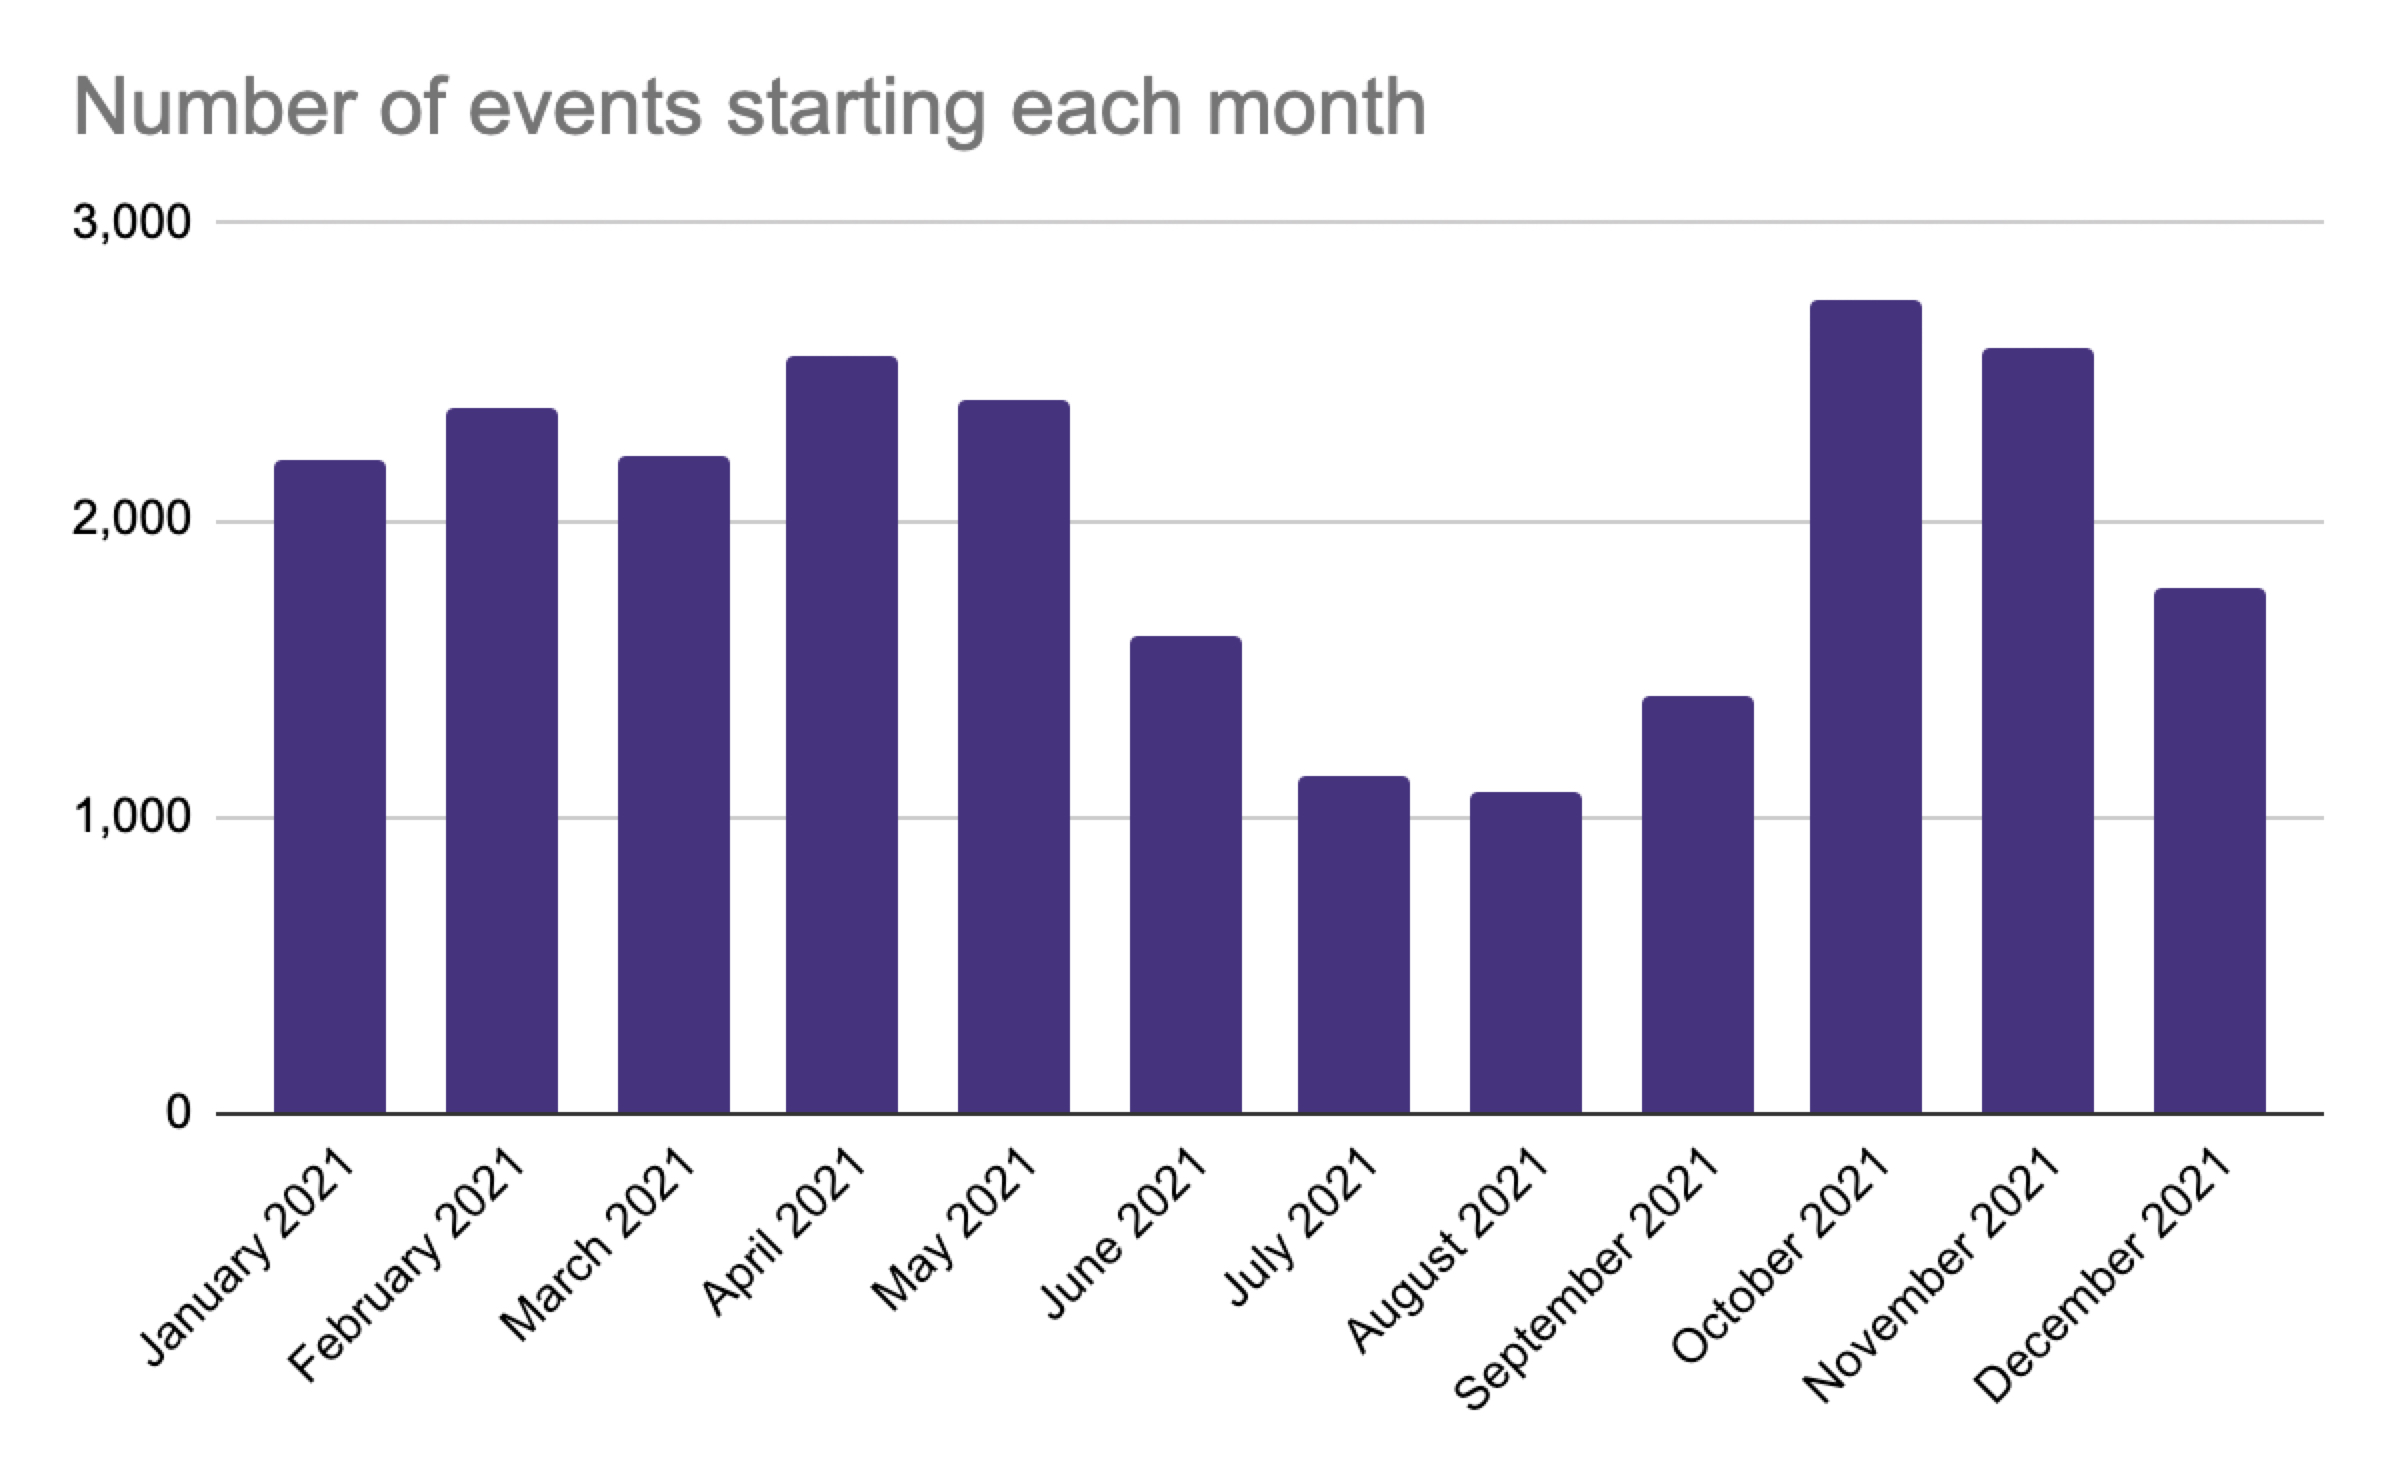 Number of Trumba events starting each month ranged from 2,600 to 2,700.